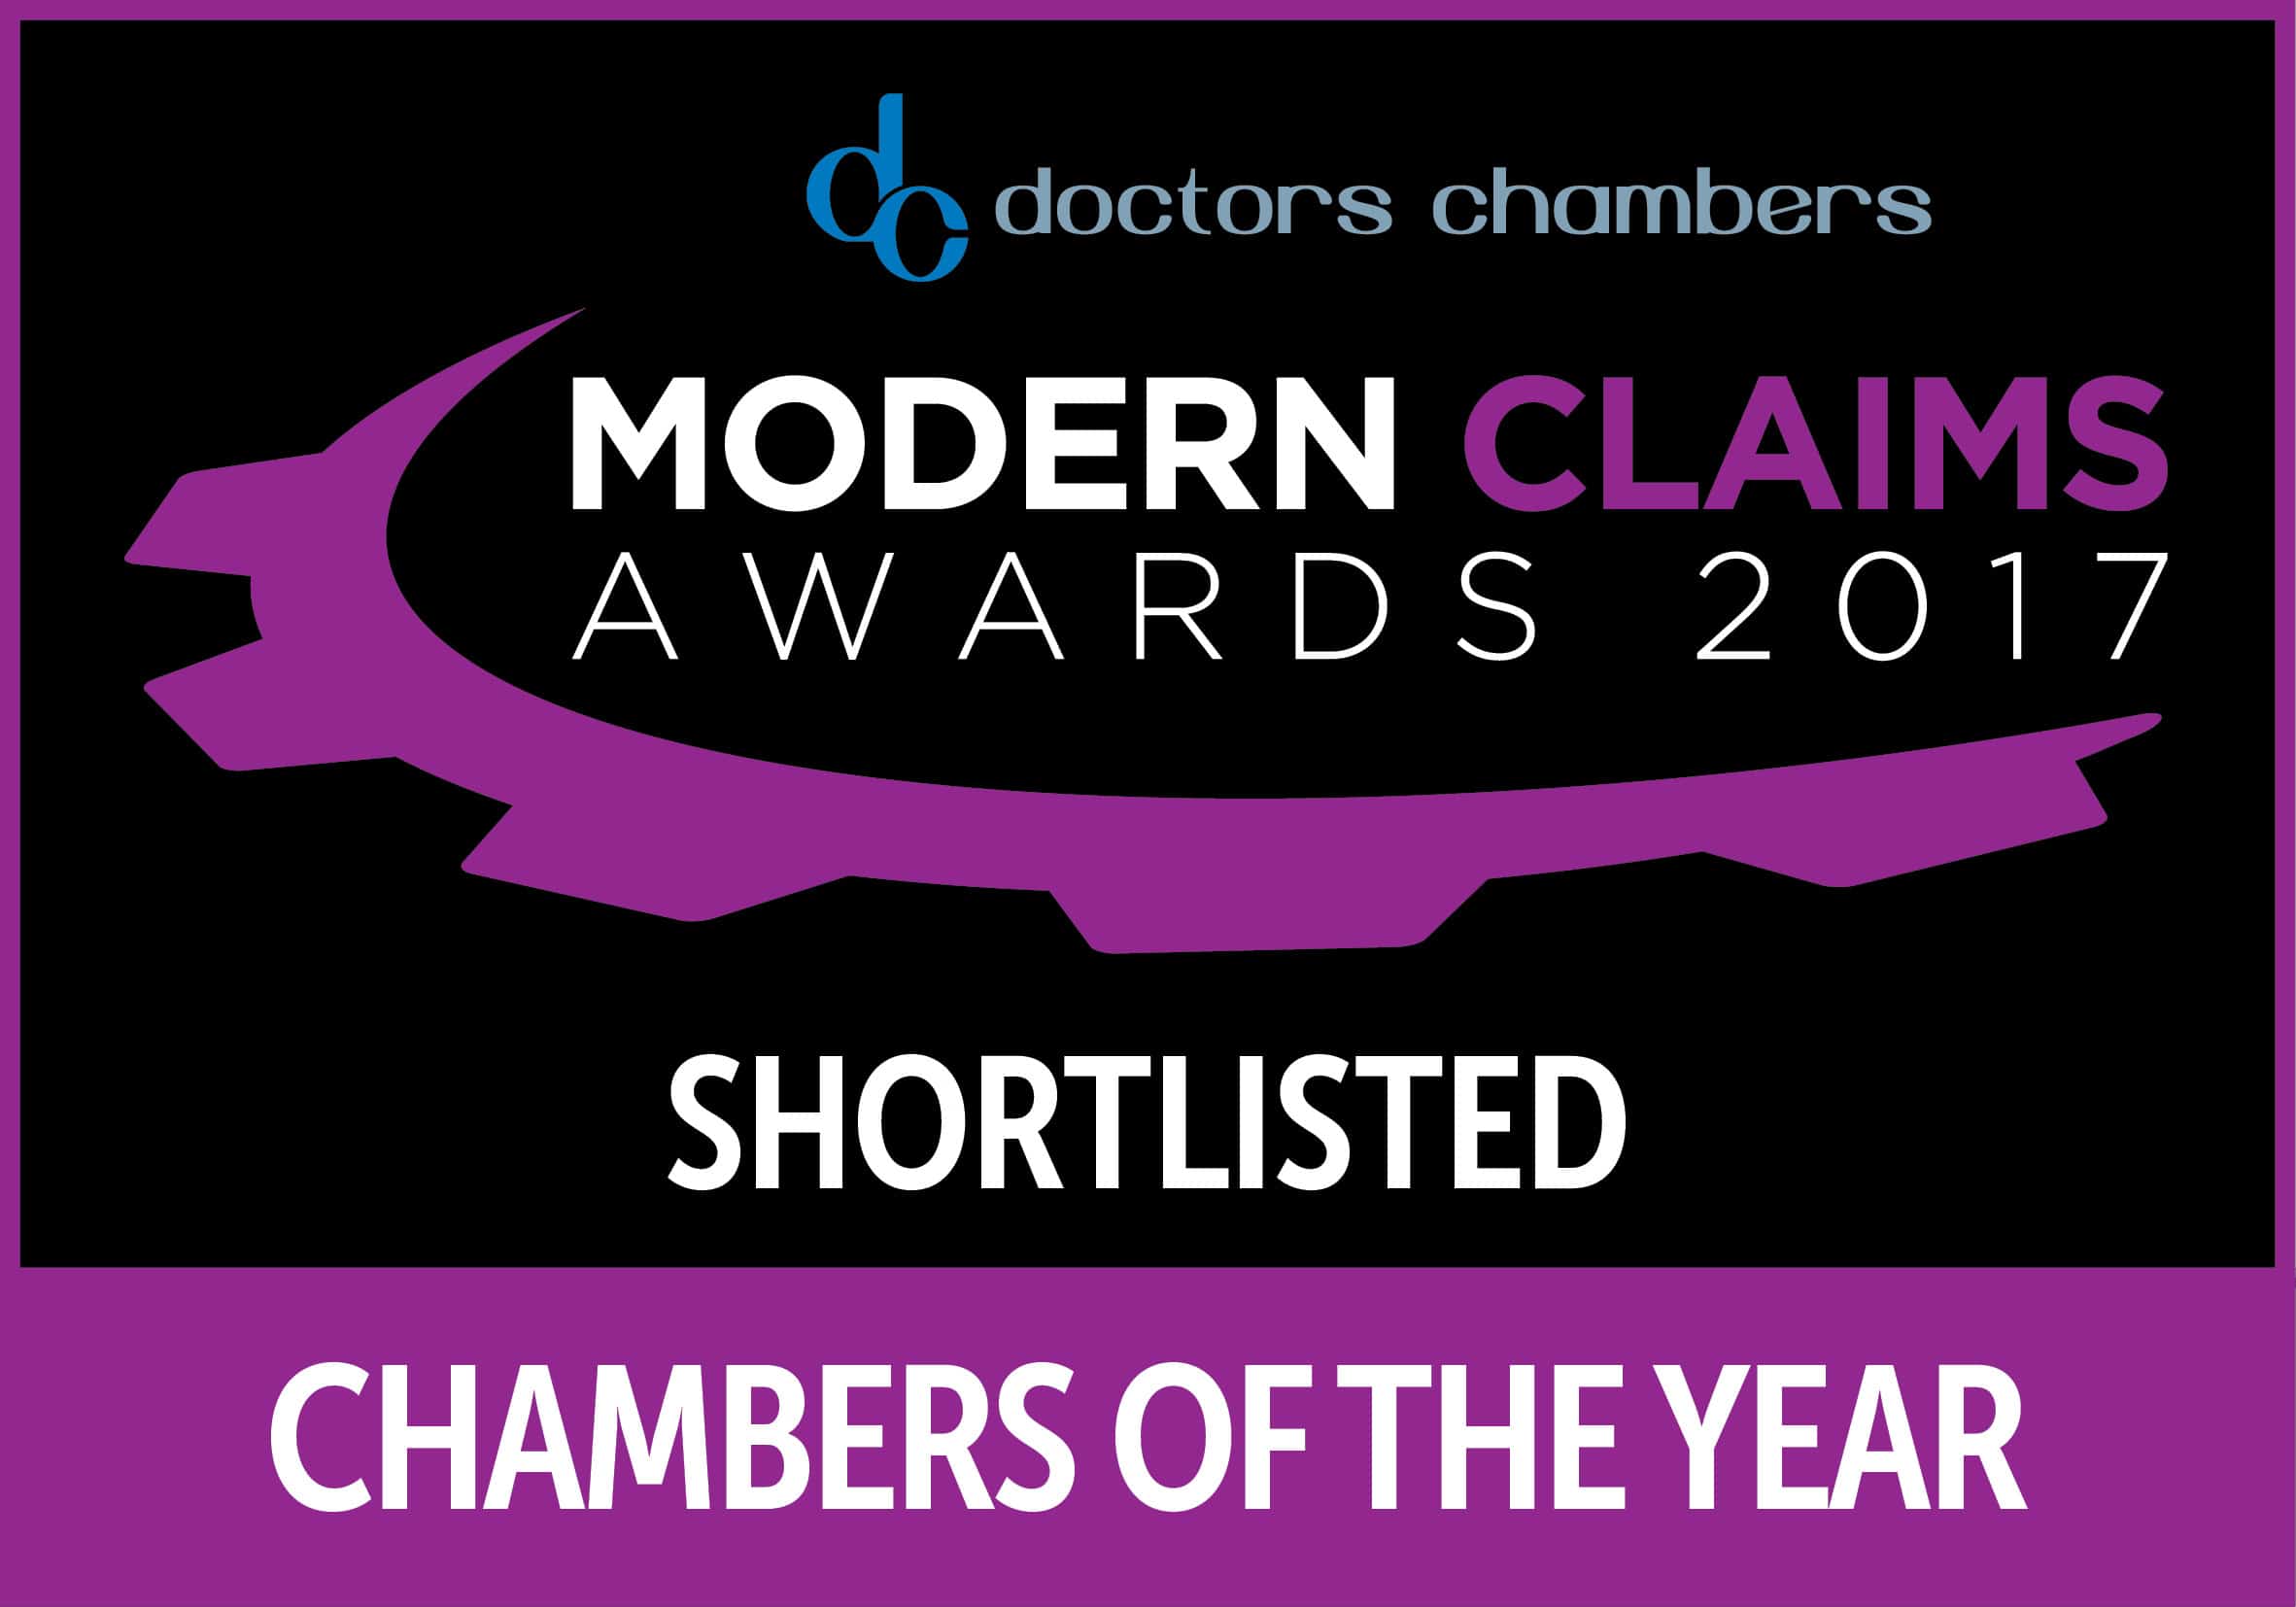 We are delighted to be shortlisted in the category of ‘Chambers of the Year’ at the 2017 Modern Claims Awards 2017